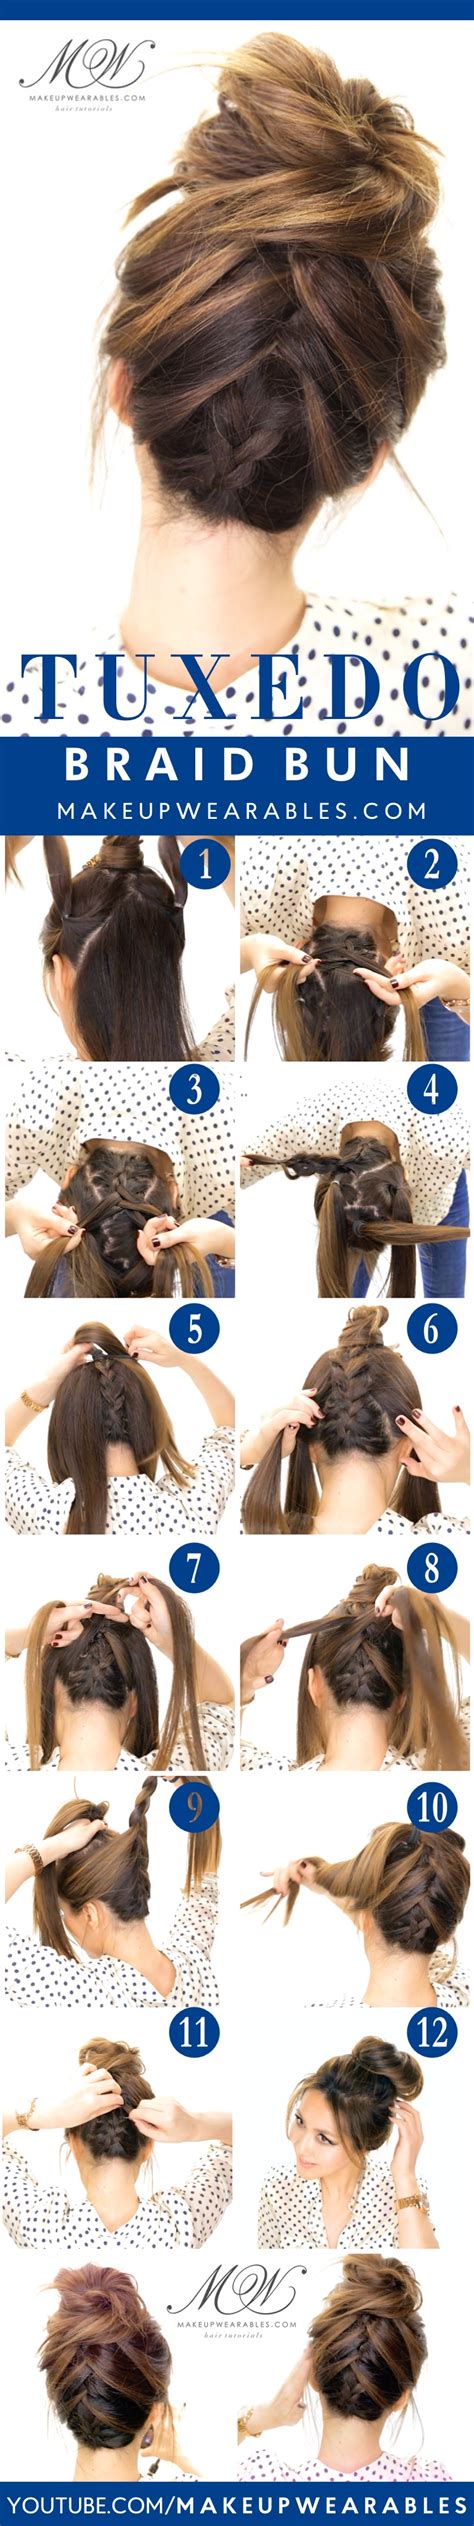 Hairstyles step by step easy. 10 Easy And Cute Hair Tutorials For Any Occassion